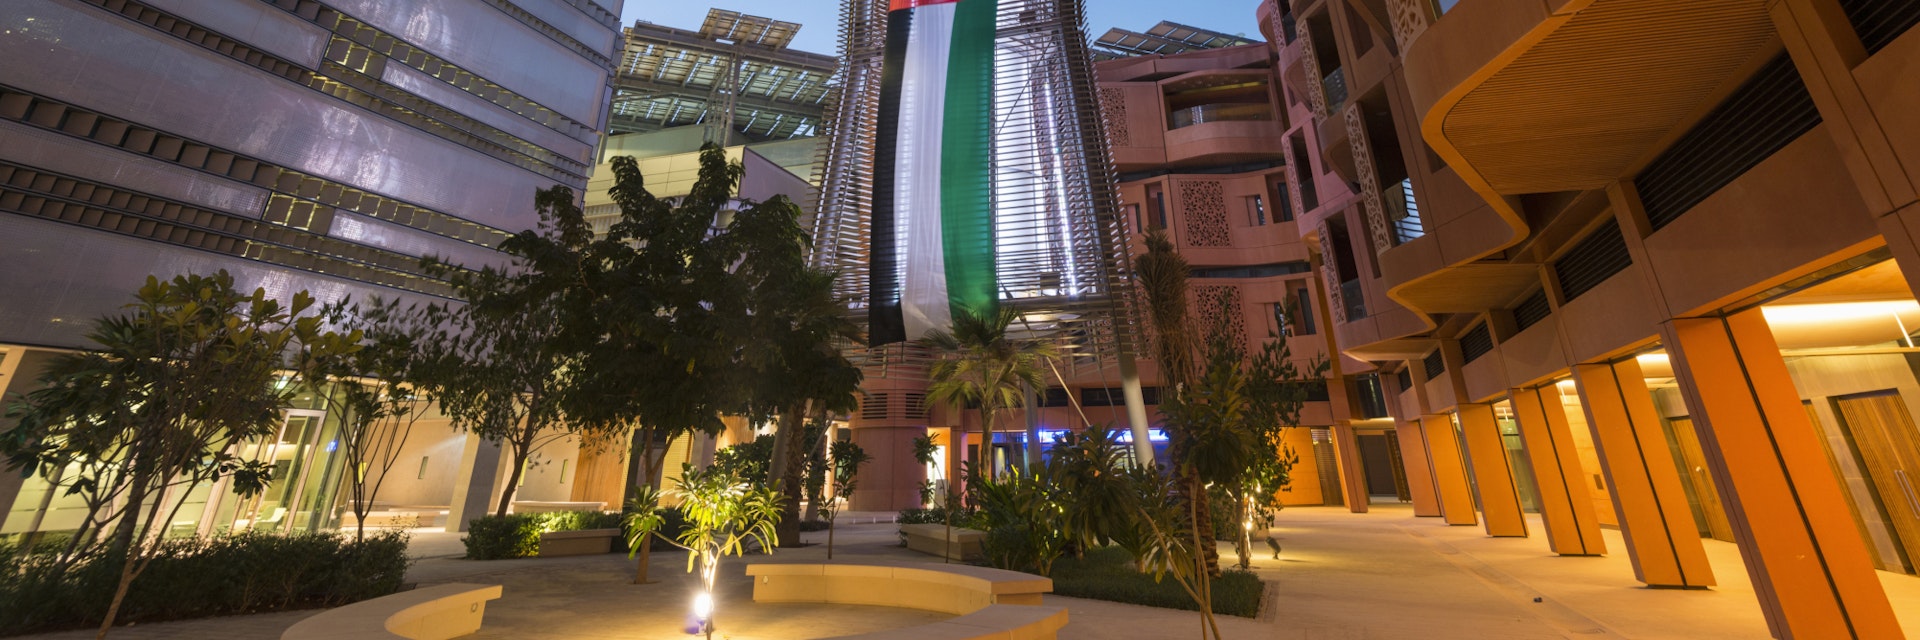 Windtower at Masdar Institute of Science and Technology in Abu Dhabi, United Arab Emirates.